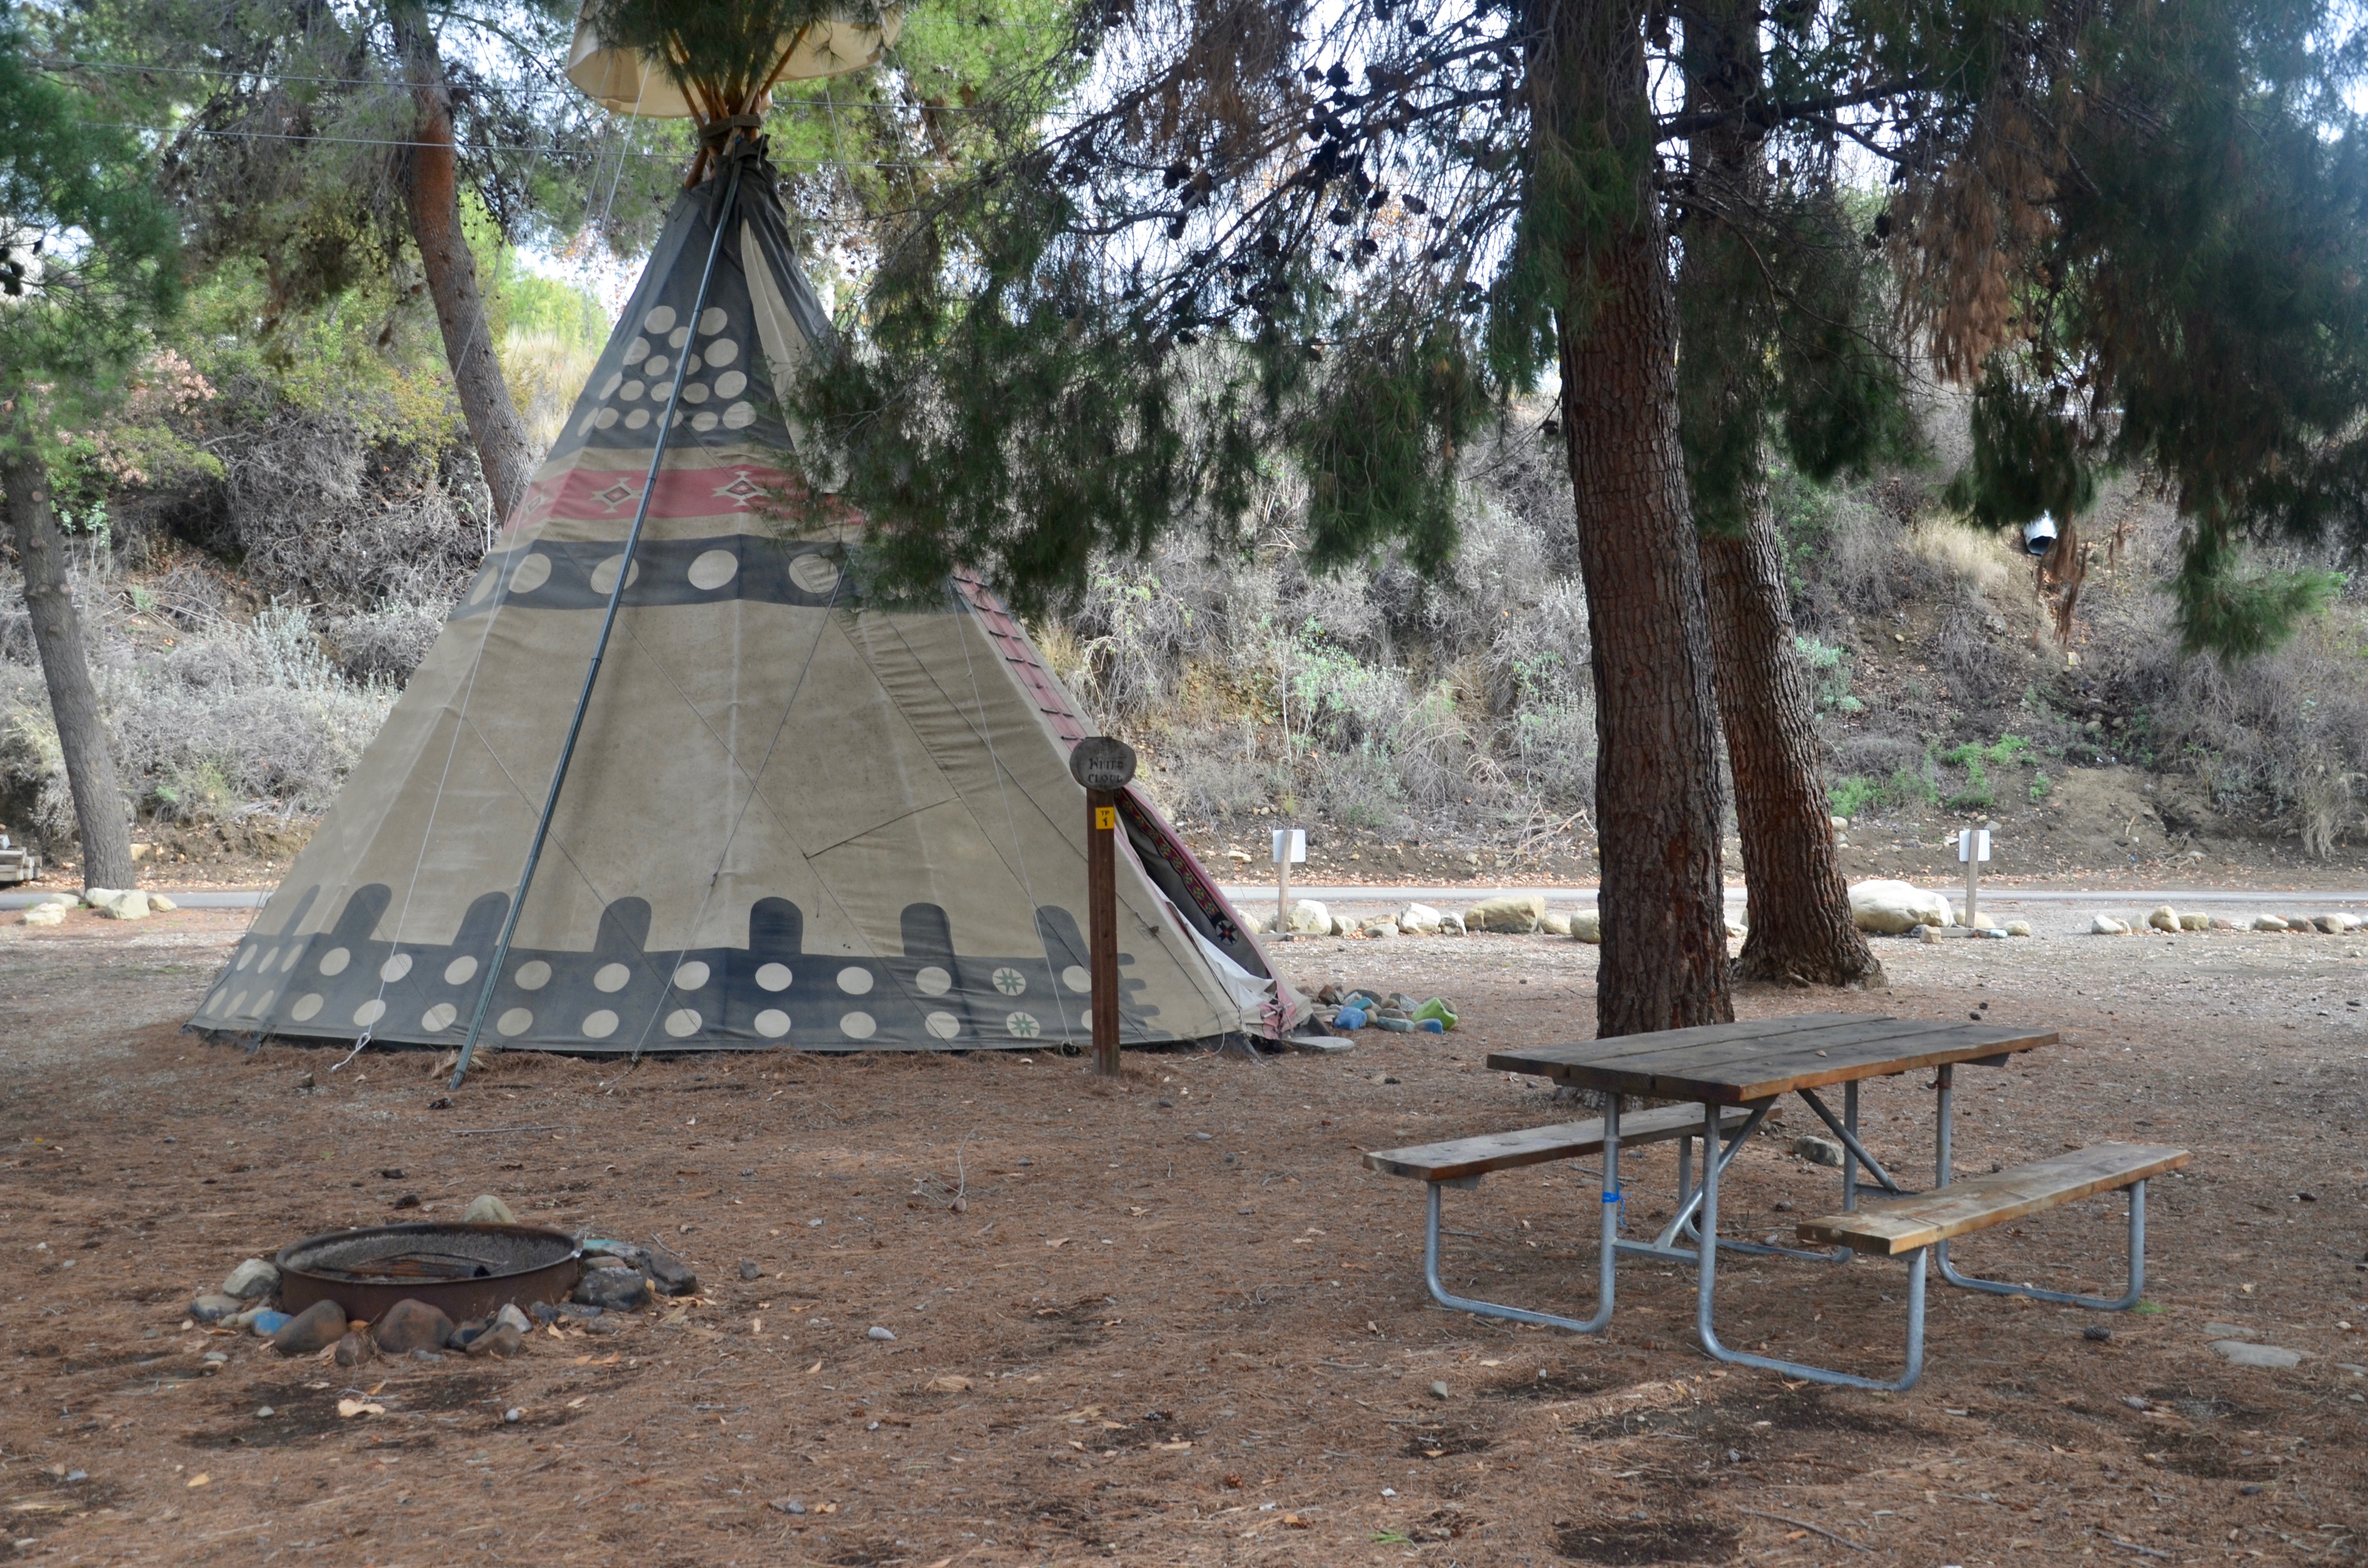 Sleep in a Teepee: 8 Places to Do Just That - Kidventurous